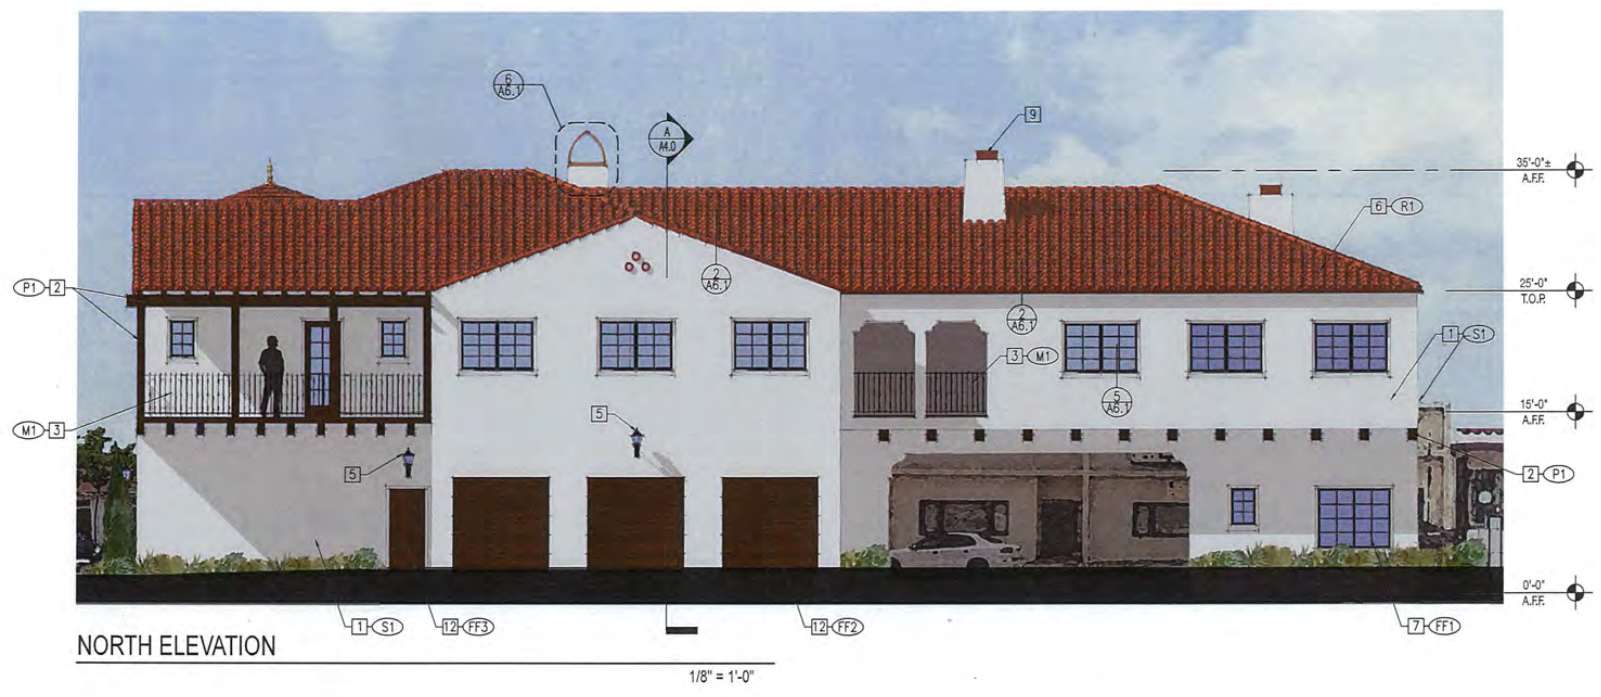 1571 East Main Street. Rendering by J.E. Armstrong Architects Inc. 